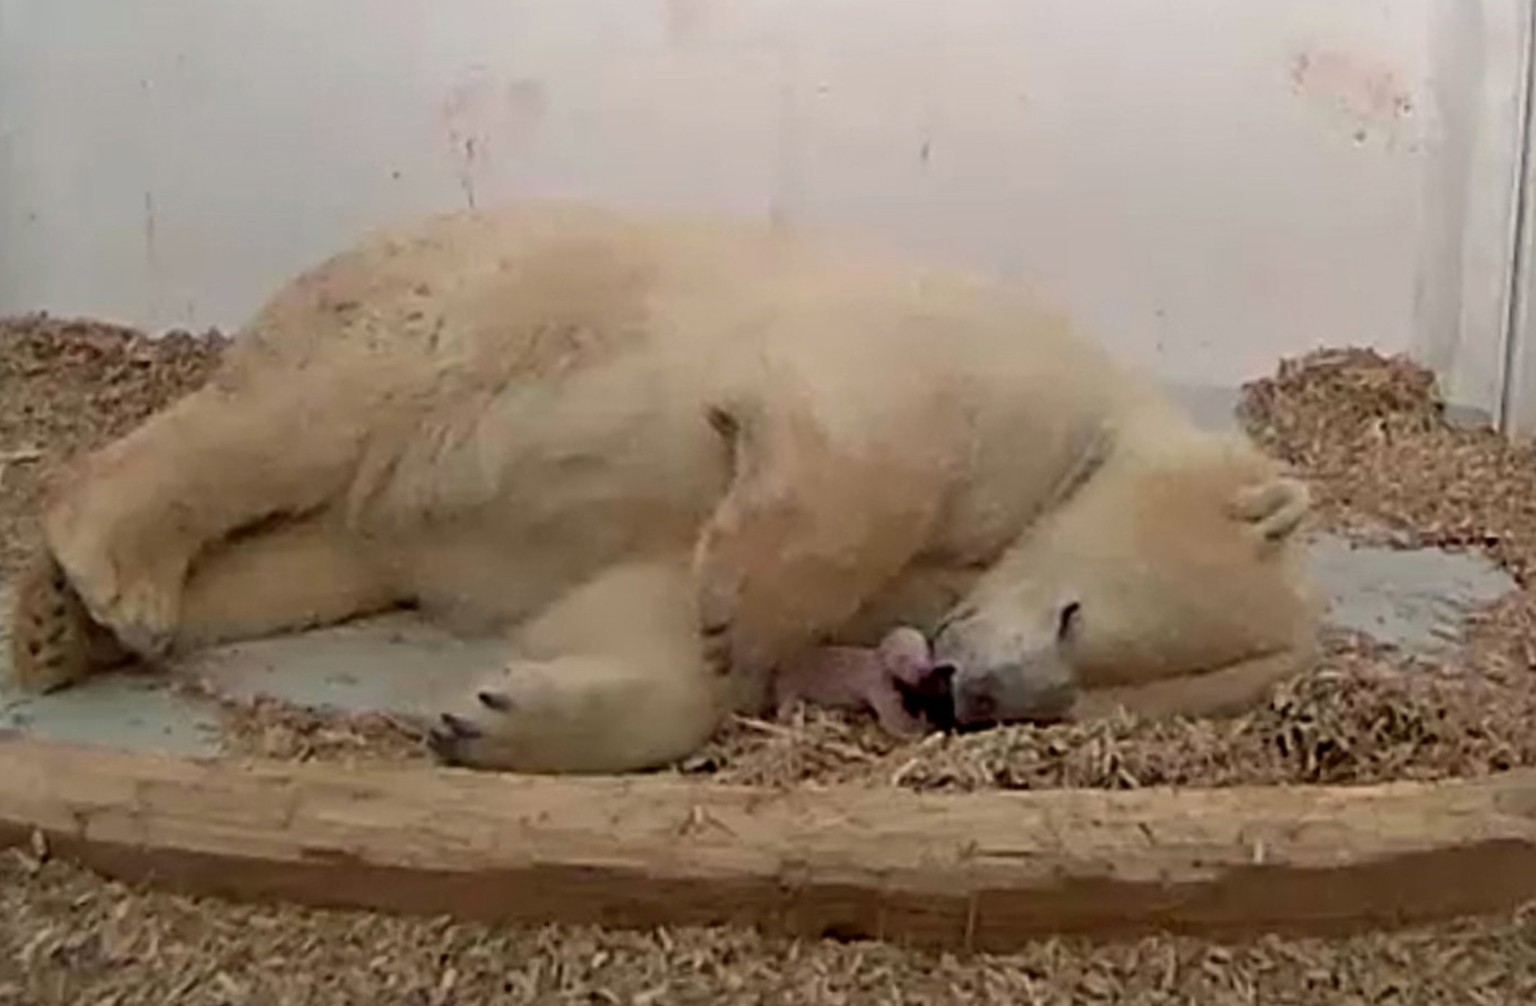 epa06377068 A handout photo made available by the Tierpark Berlin zoo on 08 December 2017 shows a screenshot of eight-year-old polar bear Tonja after giving birth to a cub in an enclosure at the Tierp ...